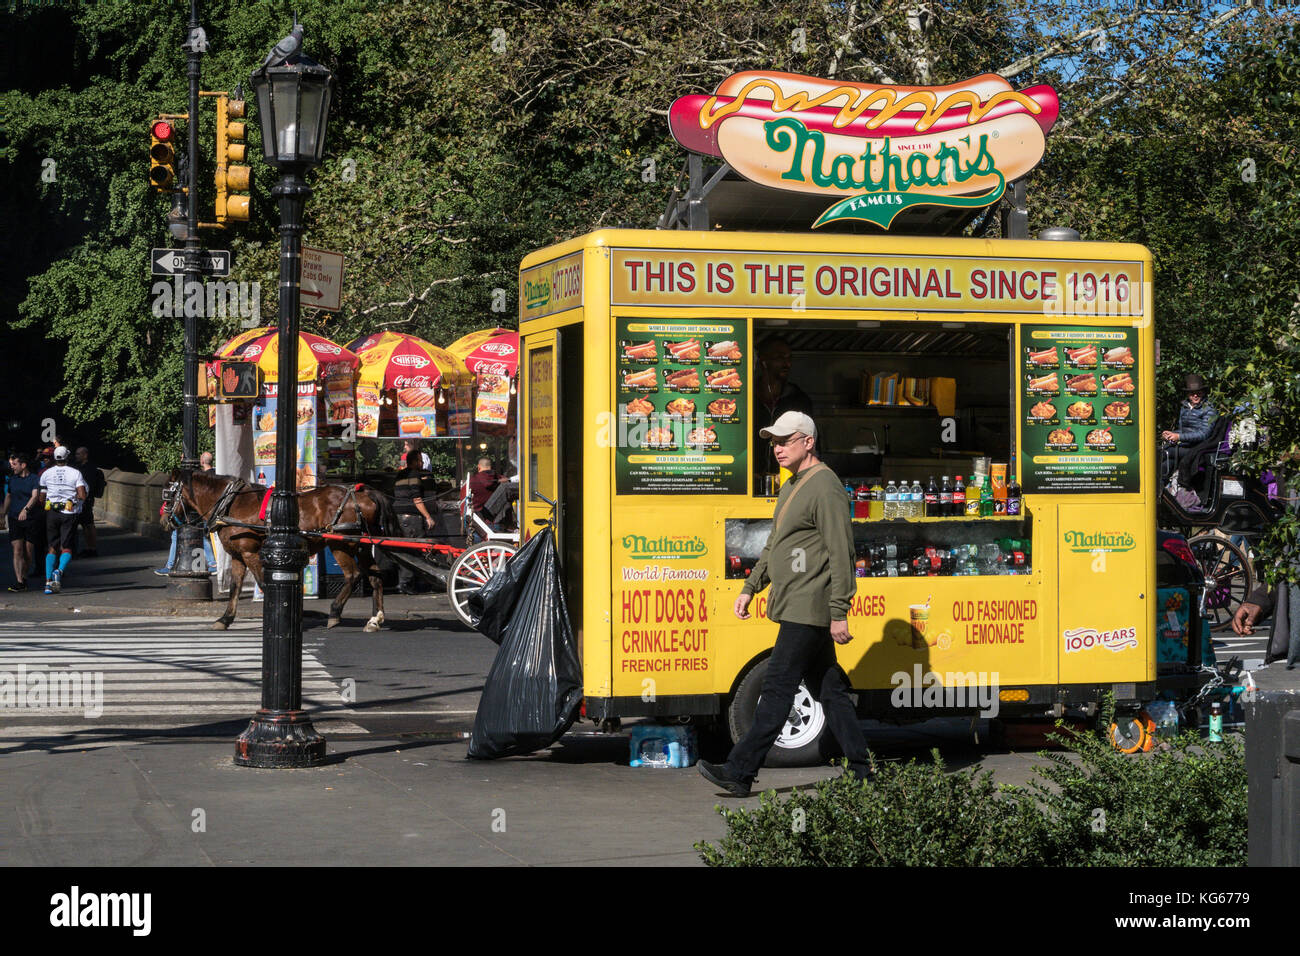 Nathan's Famous Hot Dogs & Crinkle-Cut French Fries Food Cart, NYC, USA Stockfoto